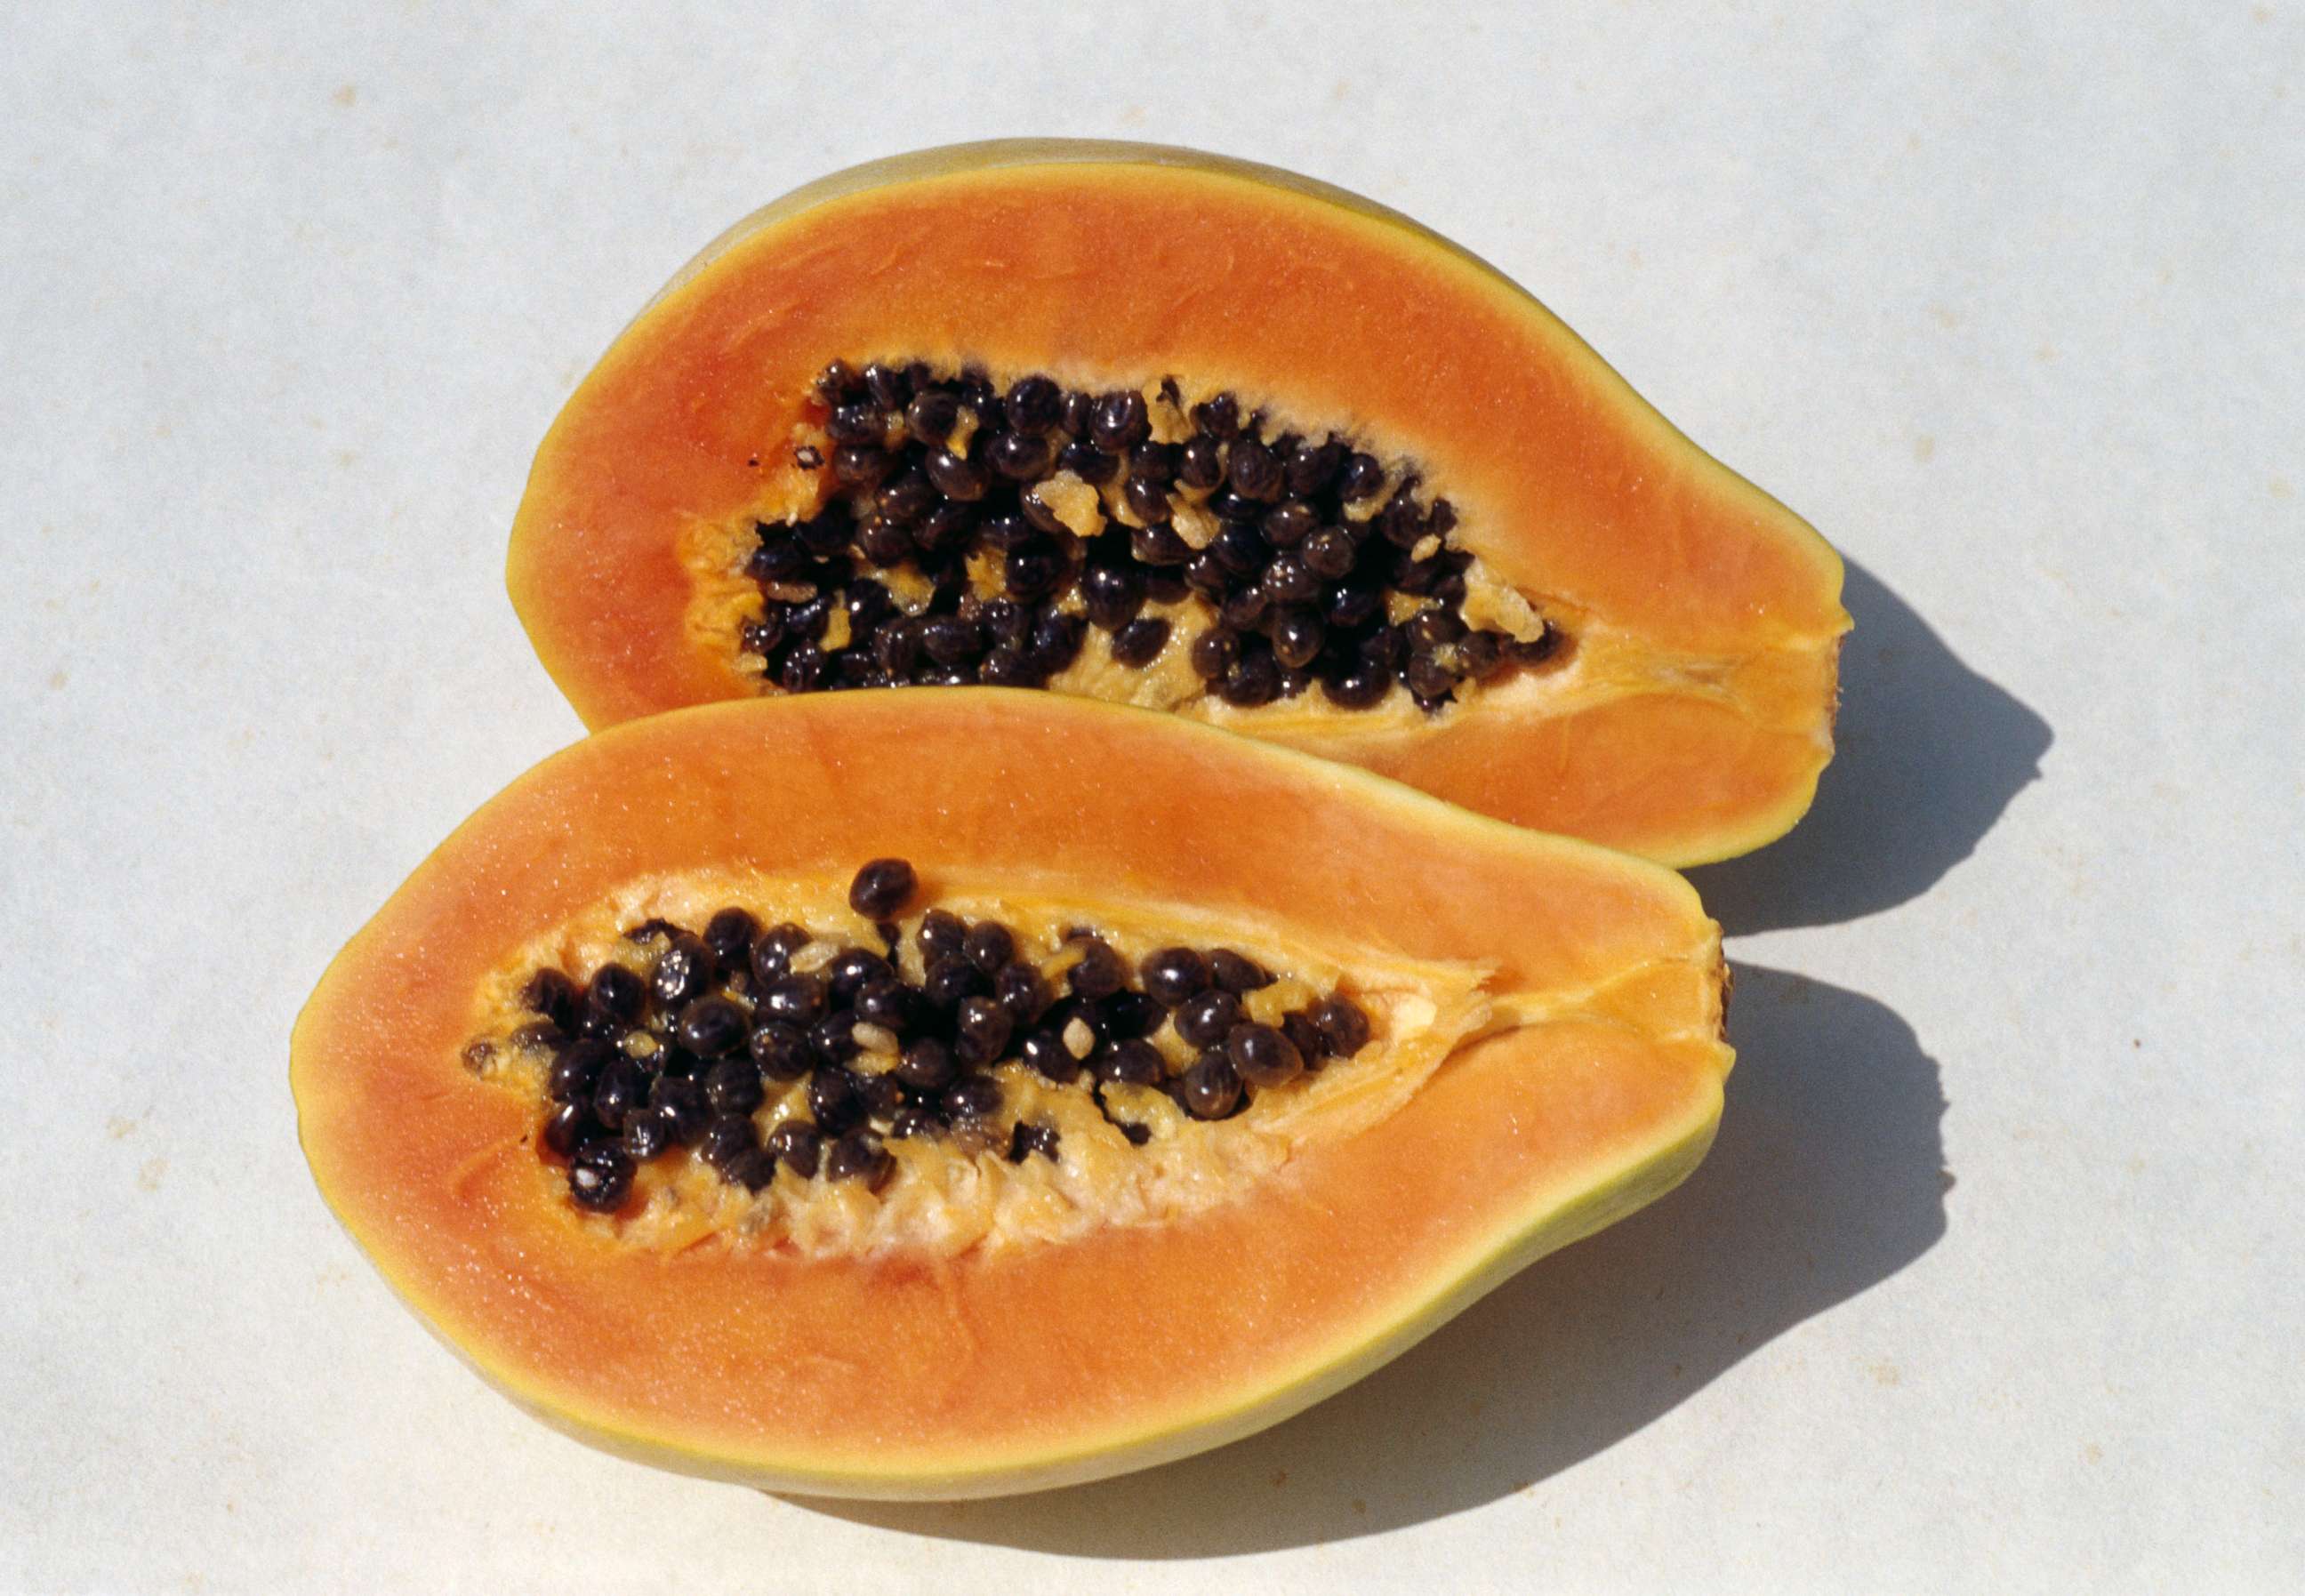 PHOTO: A papaya is shown cut into cross-sections.